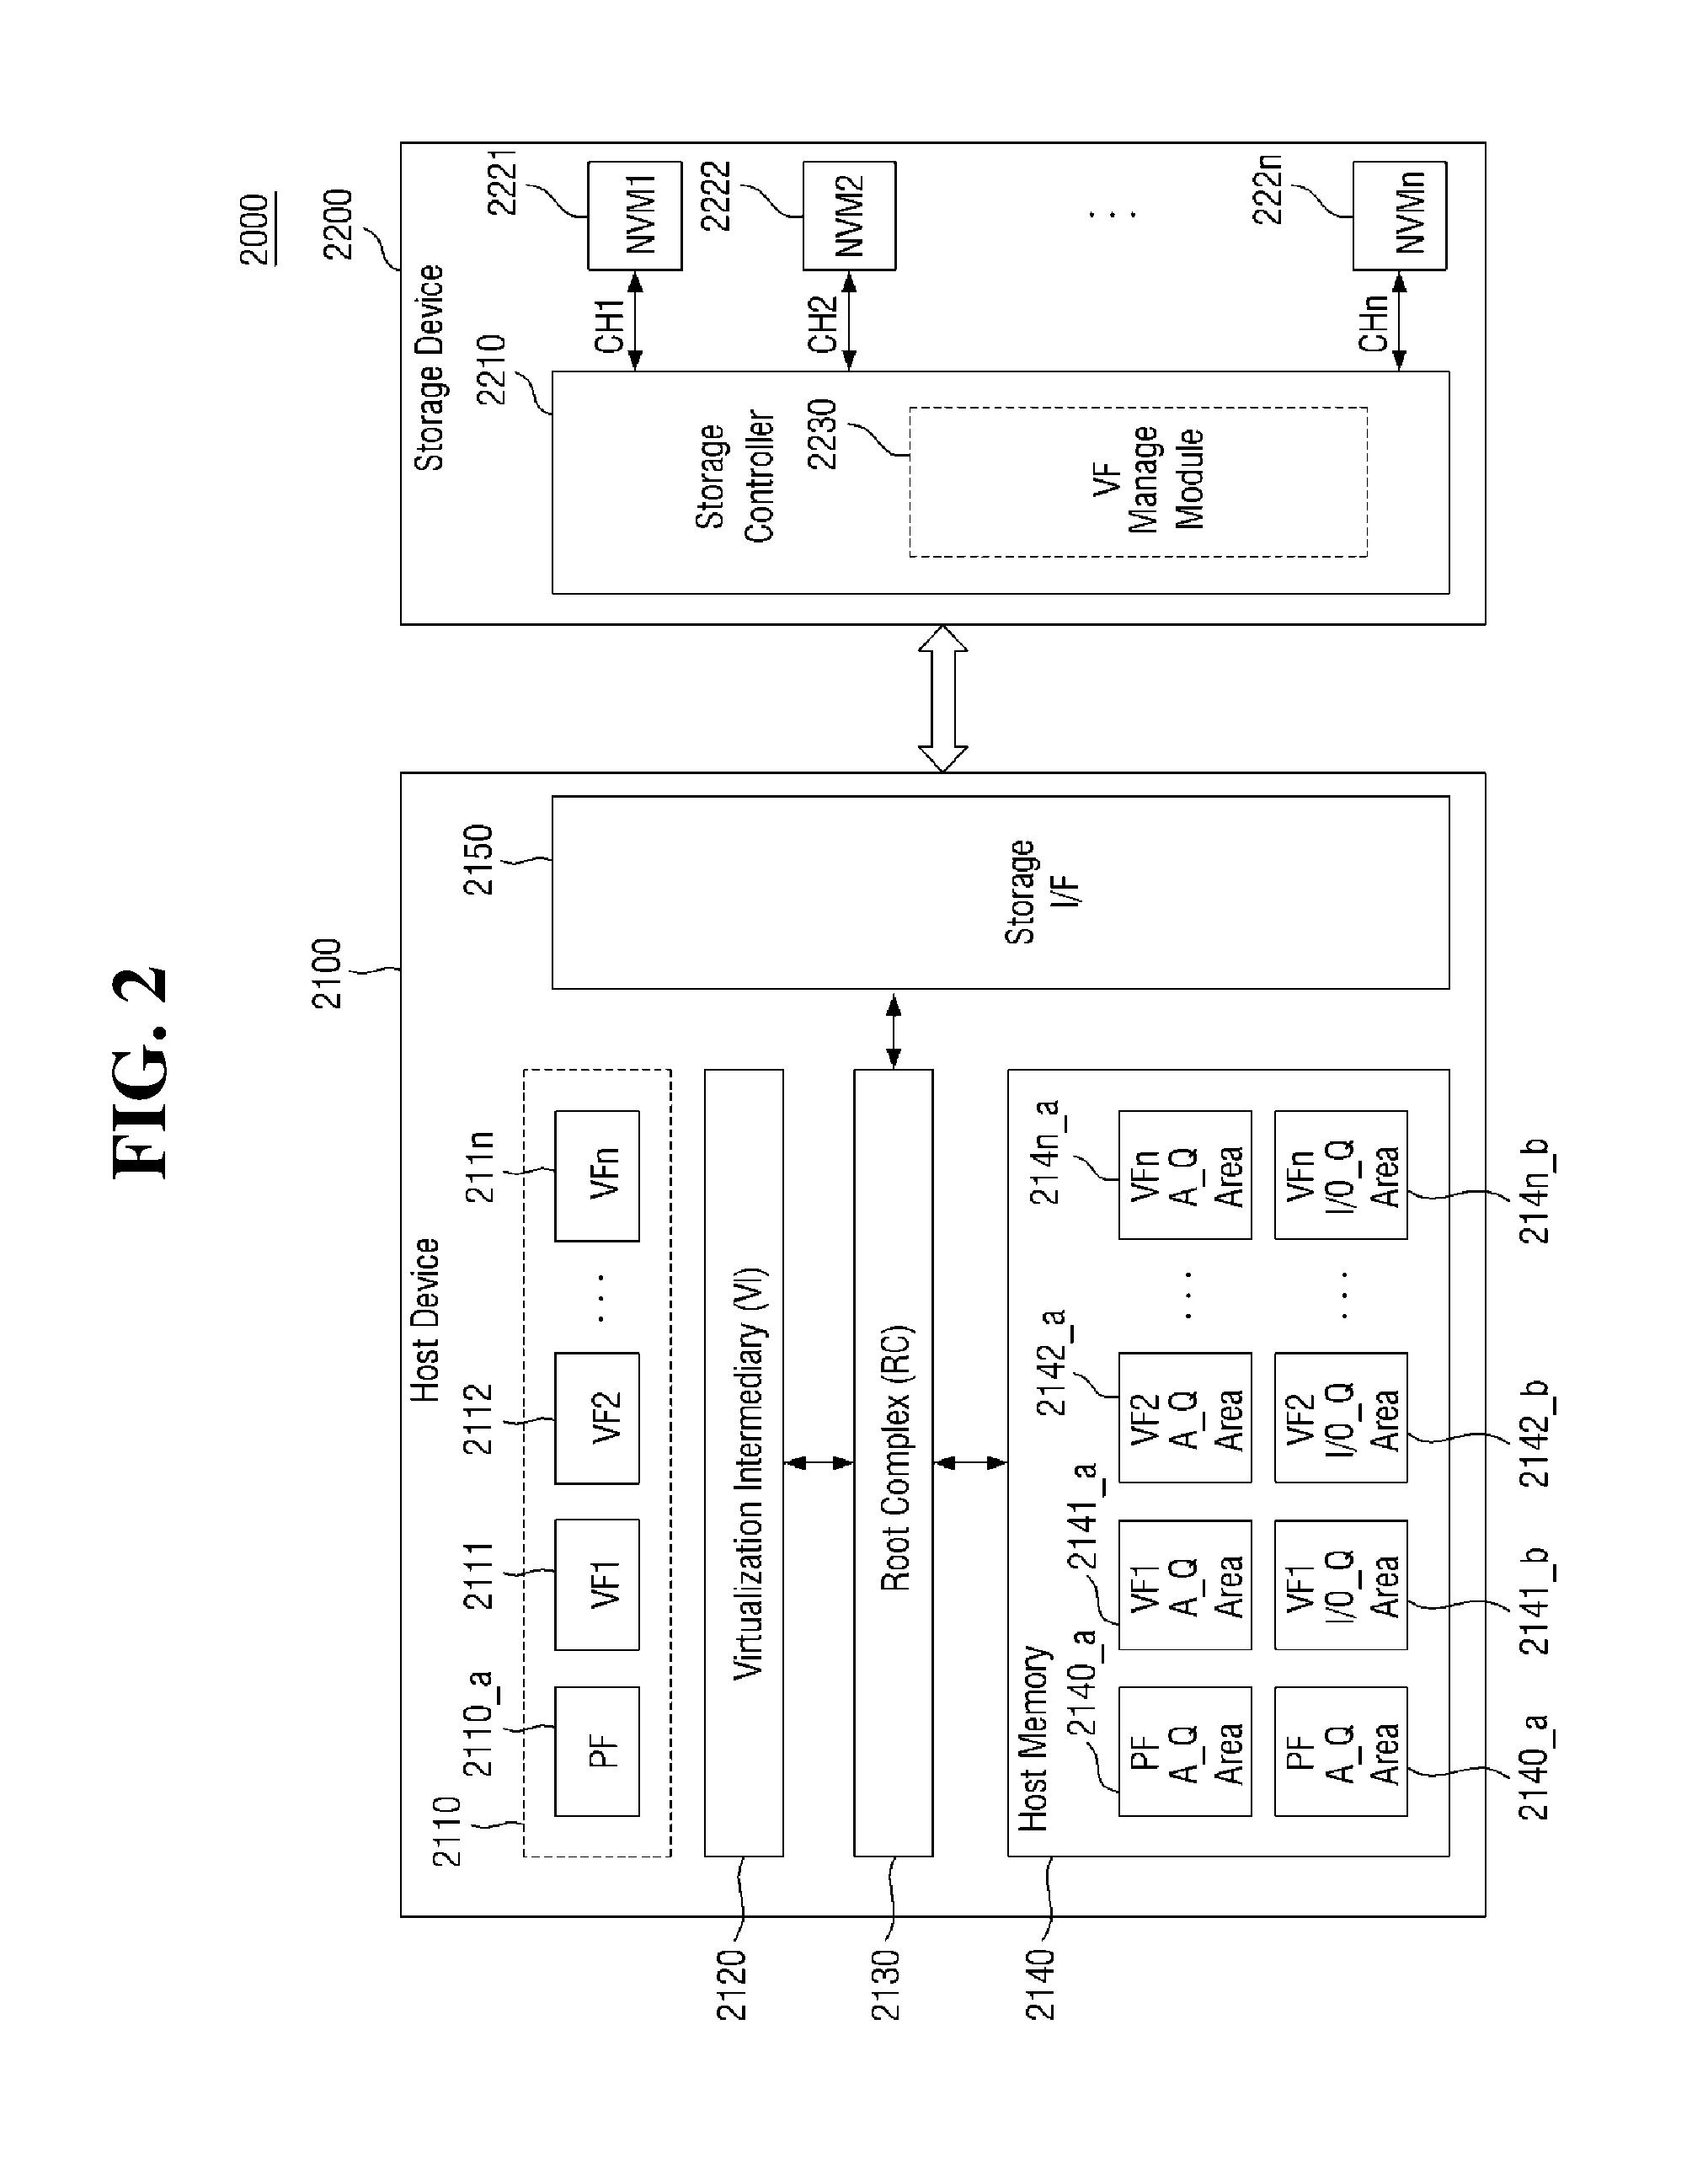 Storage device for supporting virtual machine, storage system including the storage device, and method of operating the same